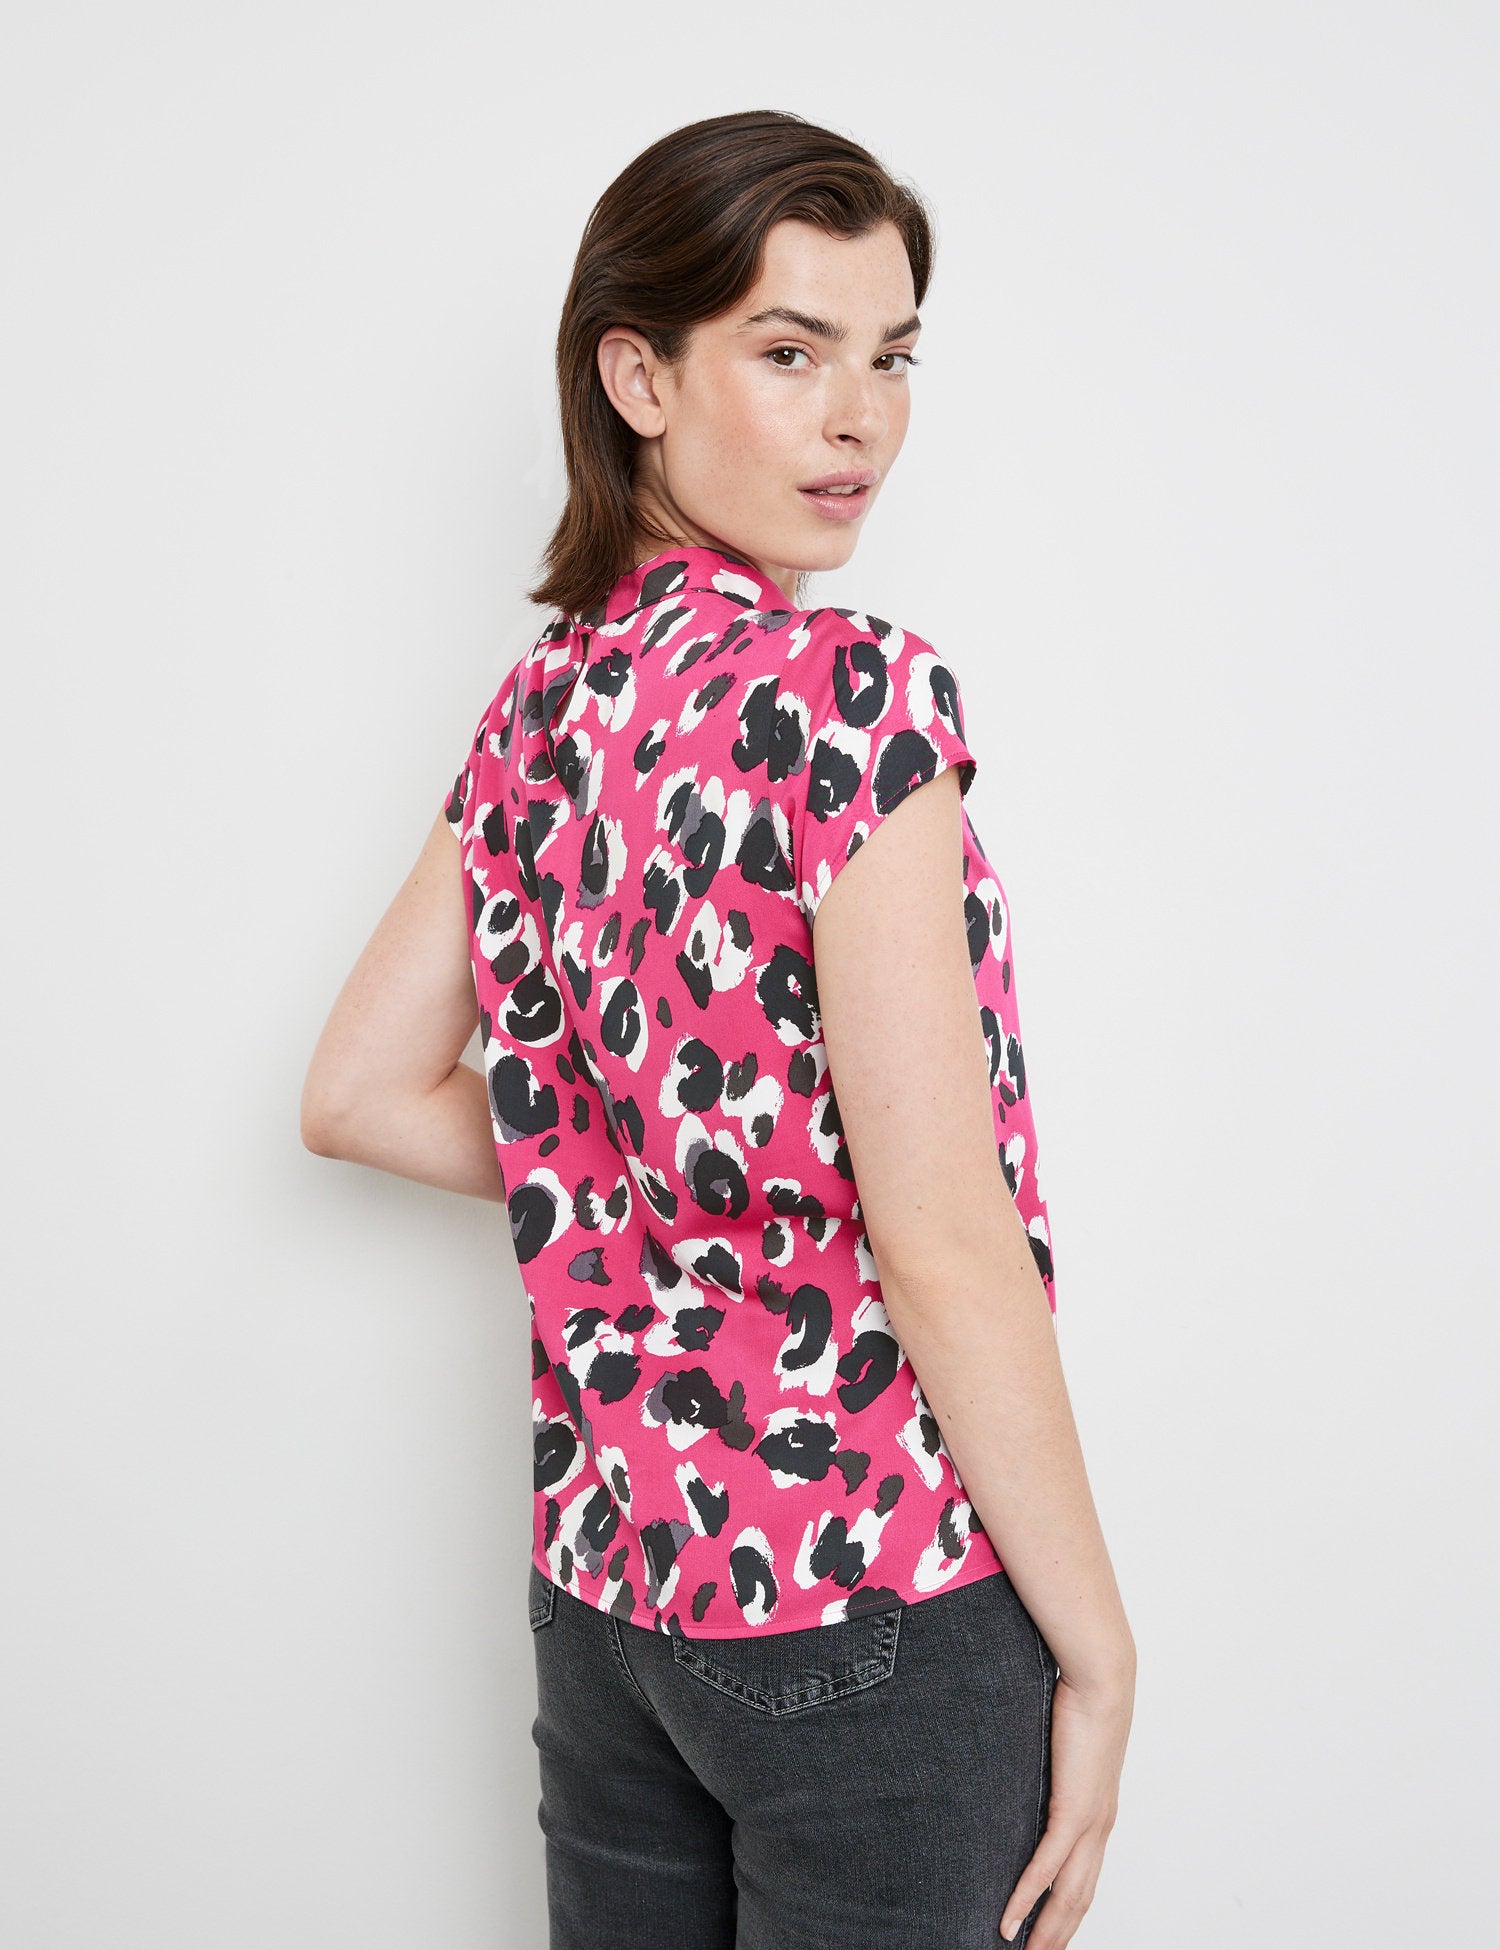 Blouse Top With A Leopard Pattern_460409-11210_3402_06